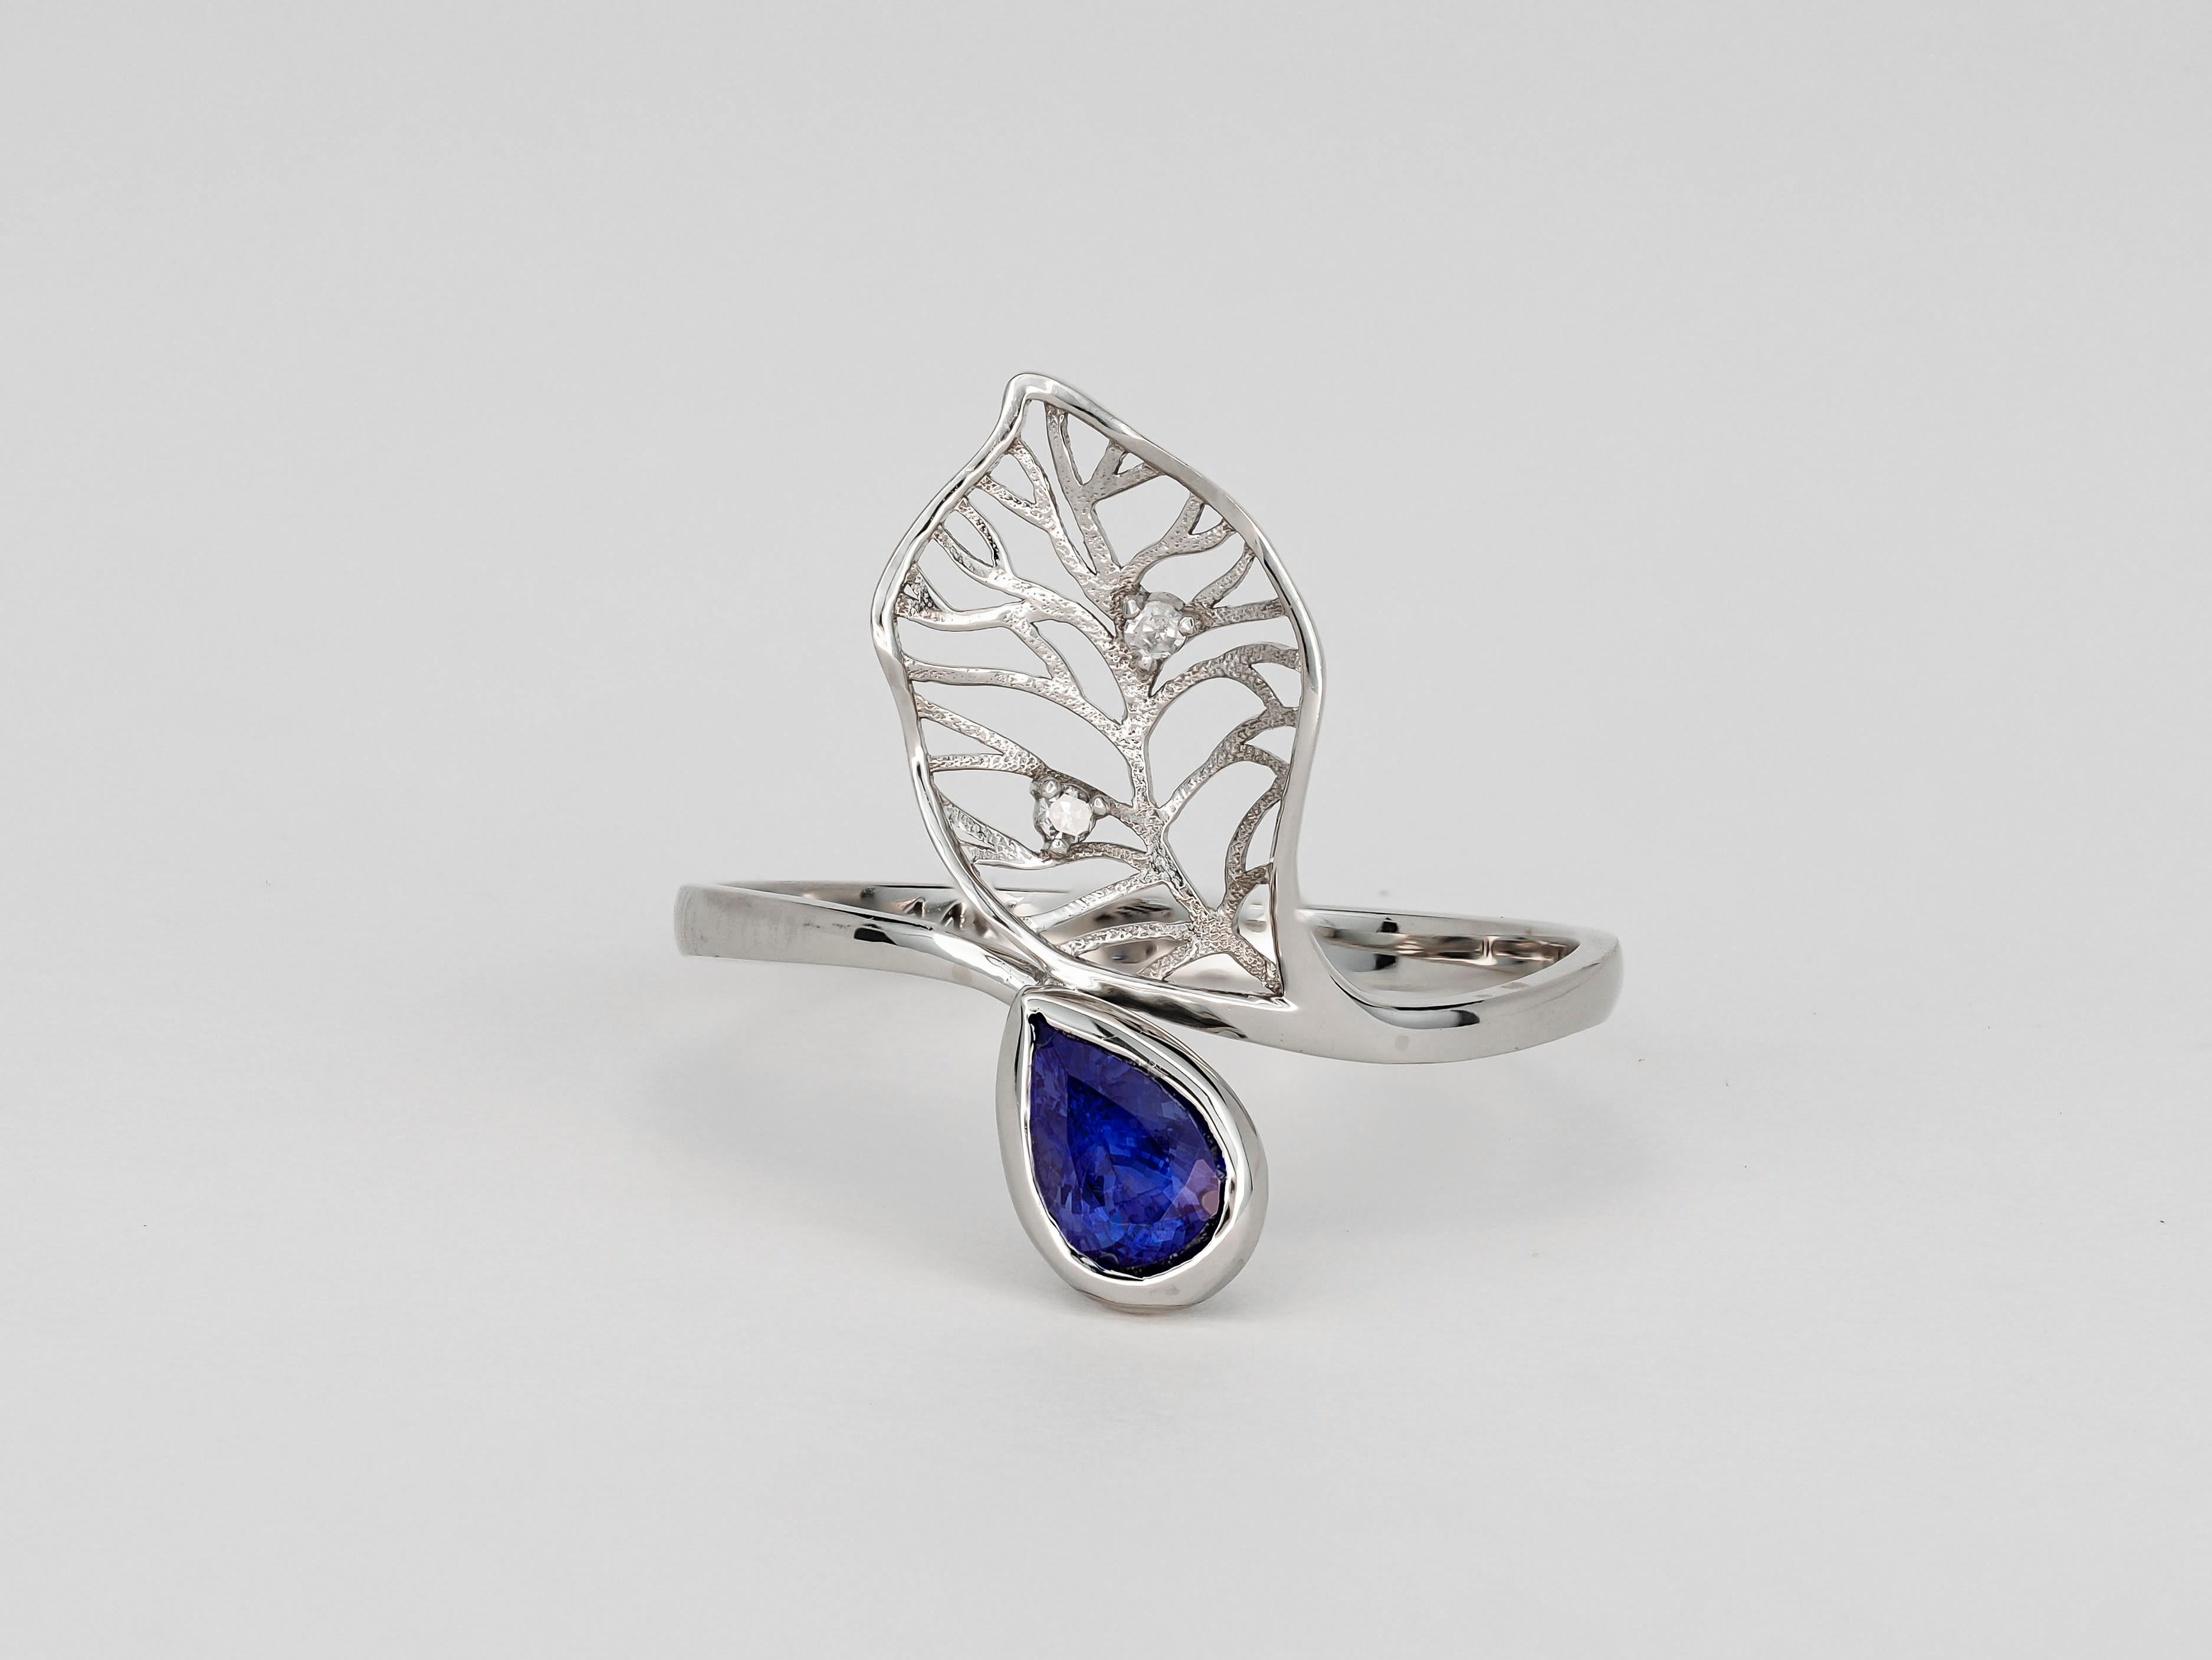 For Sale:  14 Karat Gold Ring with Sapphire and Diamonds. Floral Design Ring with Sapphire 4